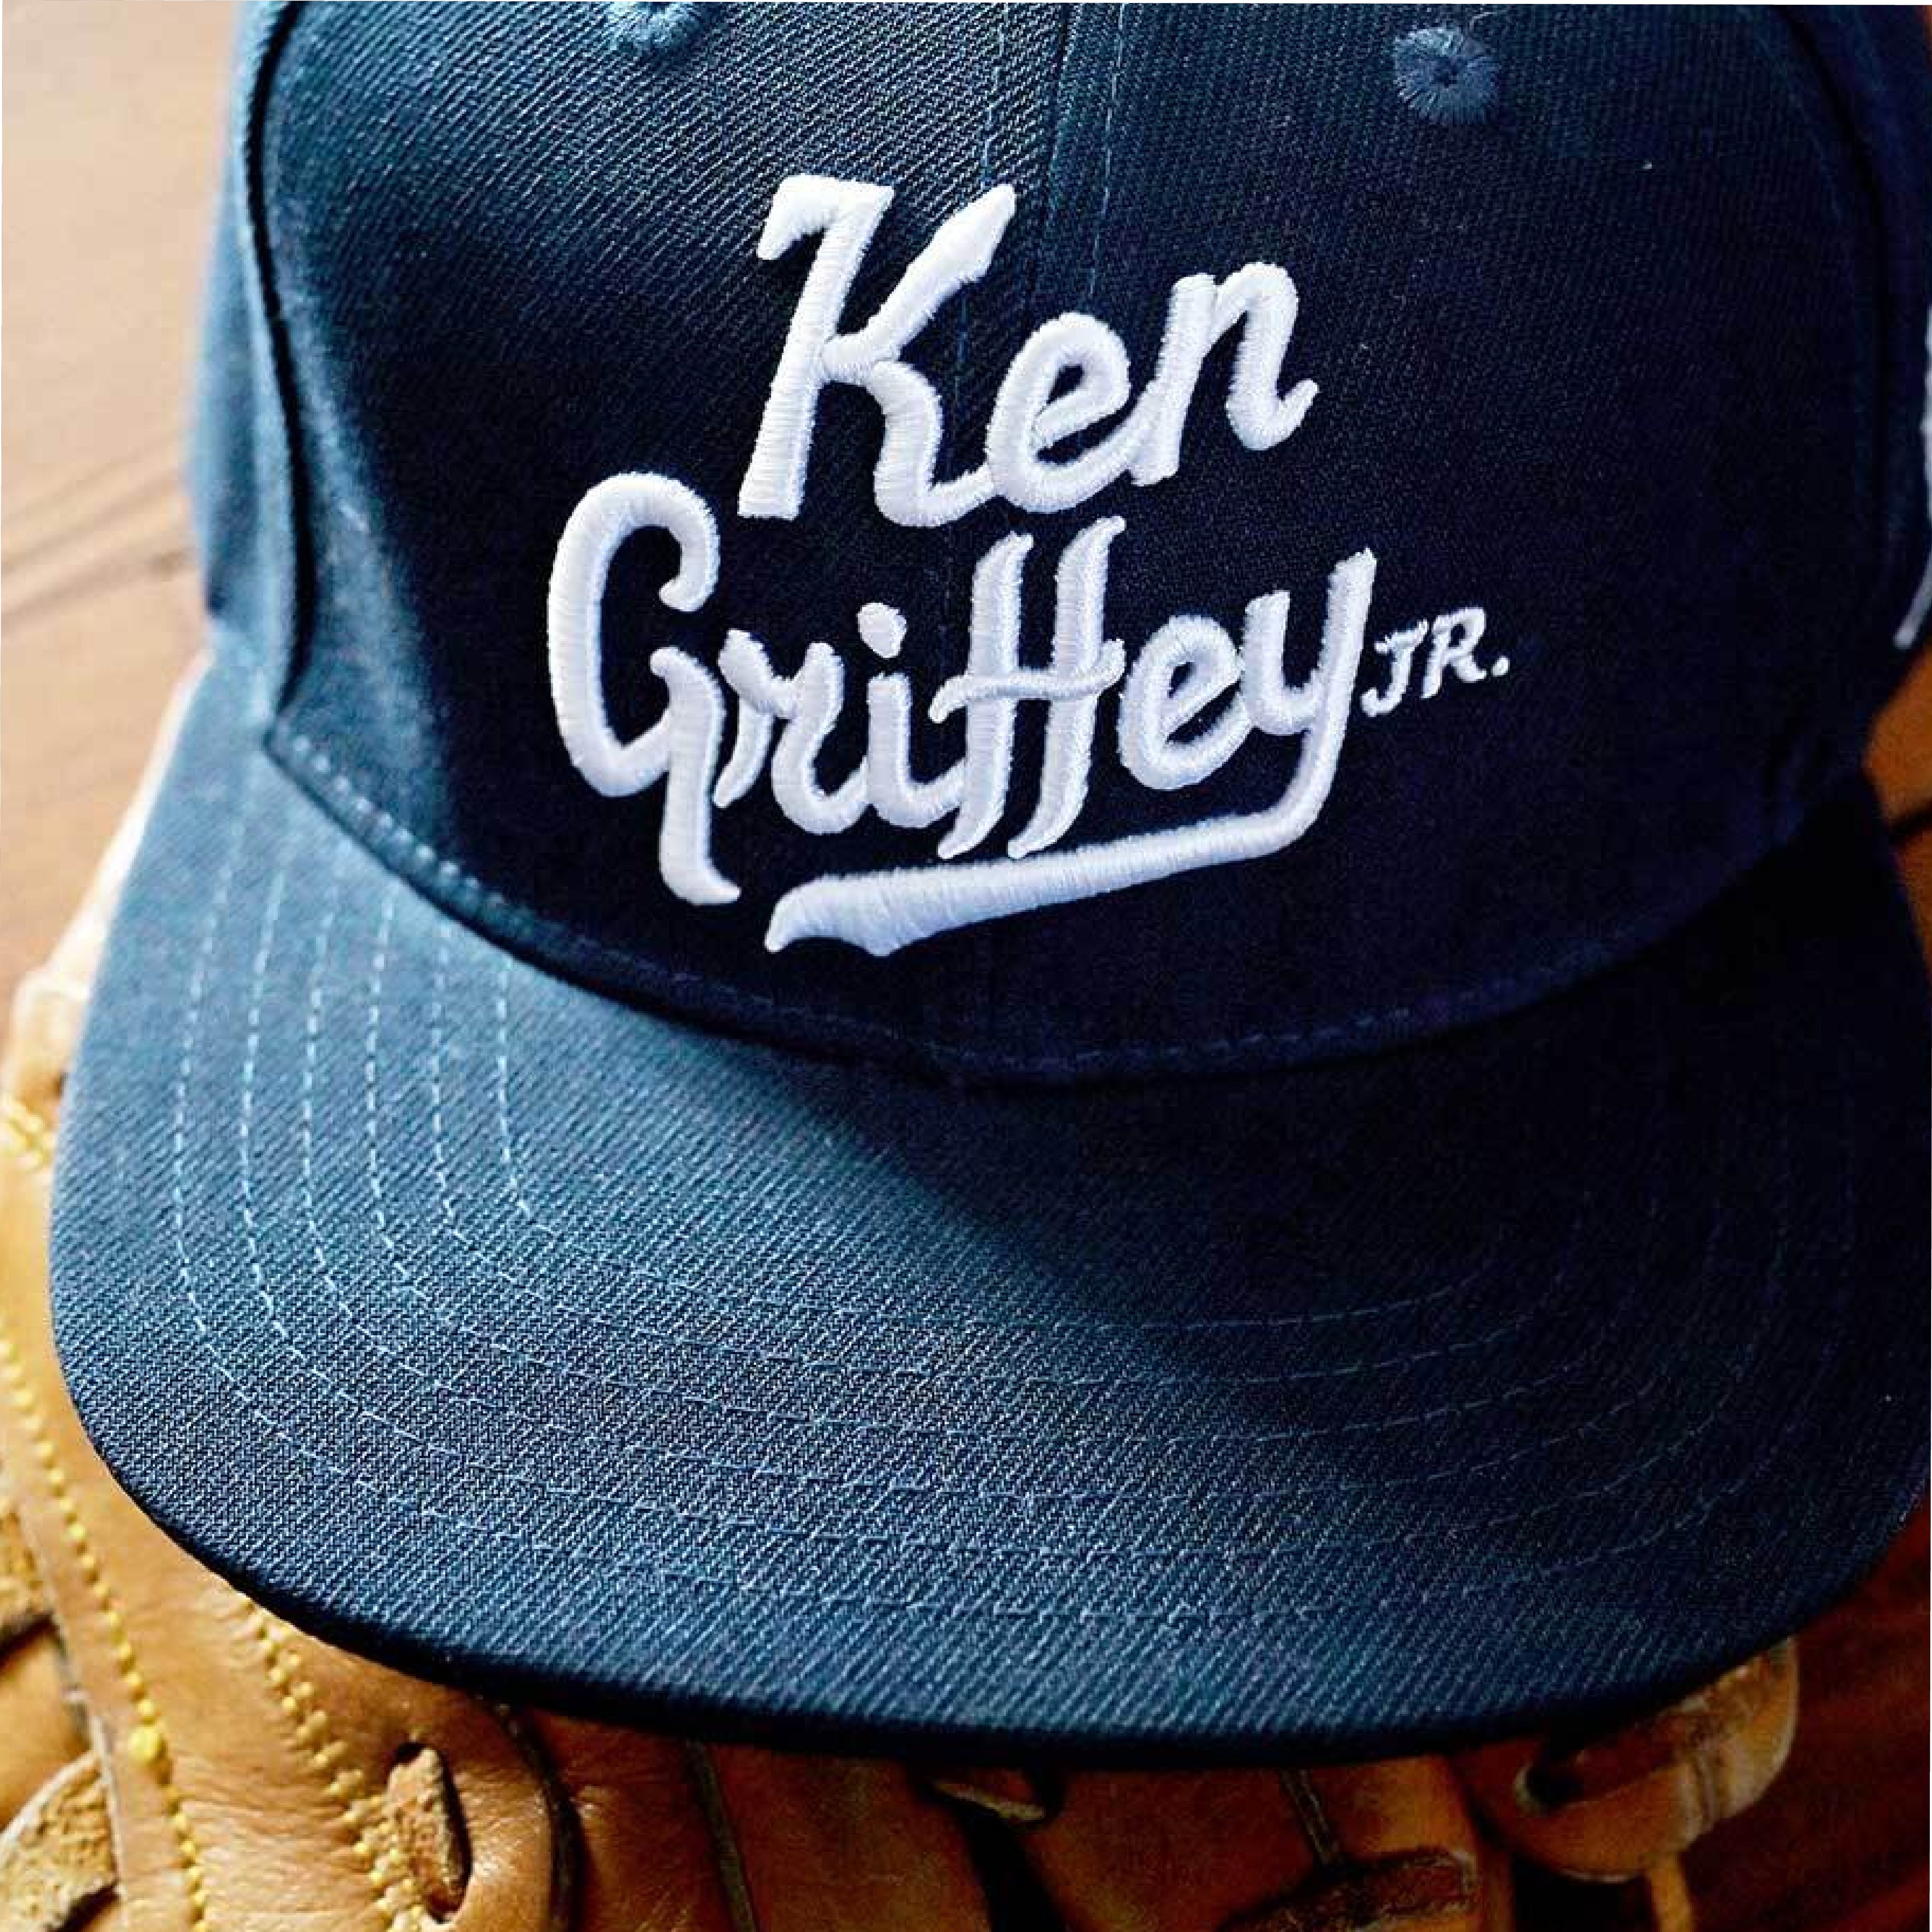 Navy blue baseball cap with 'Ken Griffey Jr.' embroidered in white on top of a baseball glove.